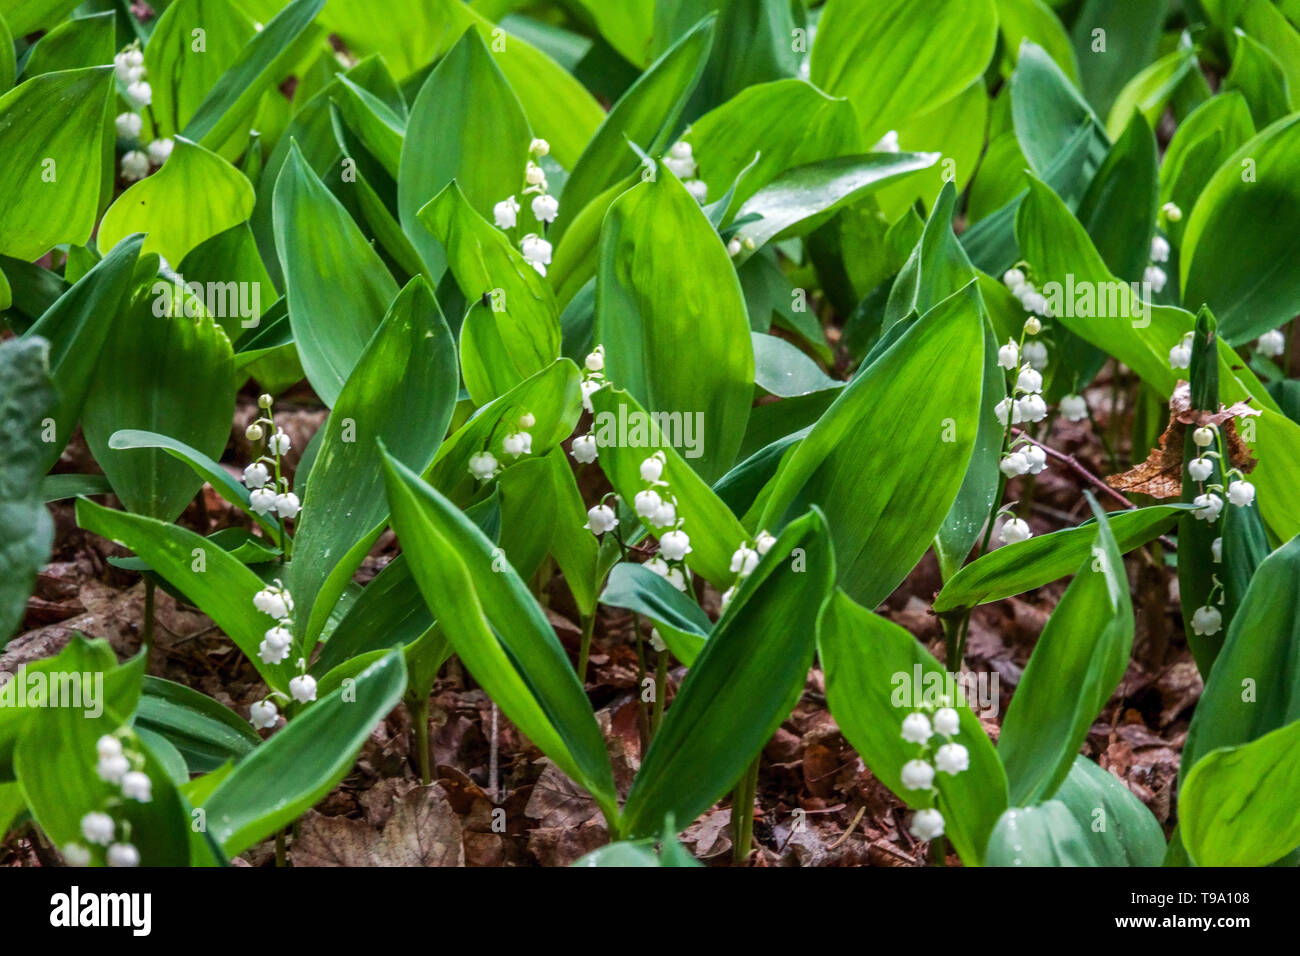 Lily of the valley, Convallaria majalis growing under trees Stock Photo